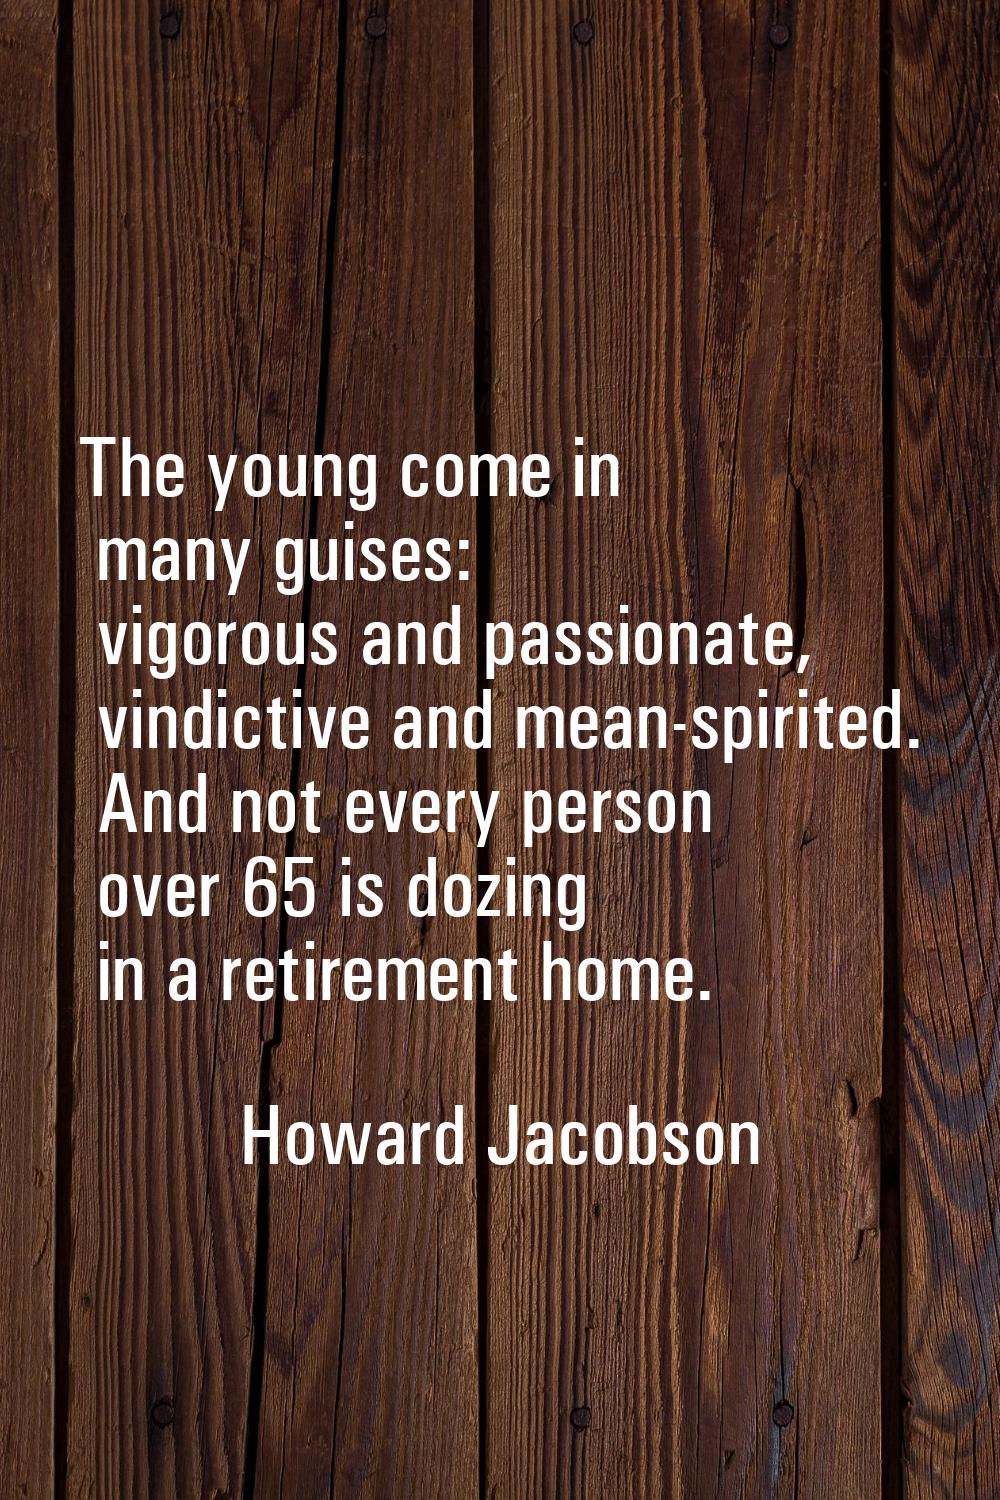 The young come in many guises: vigorous and passionate, vindictive and mean-spirited. And not every